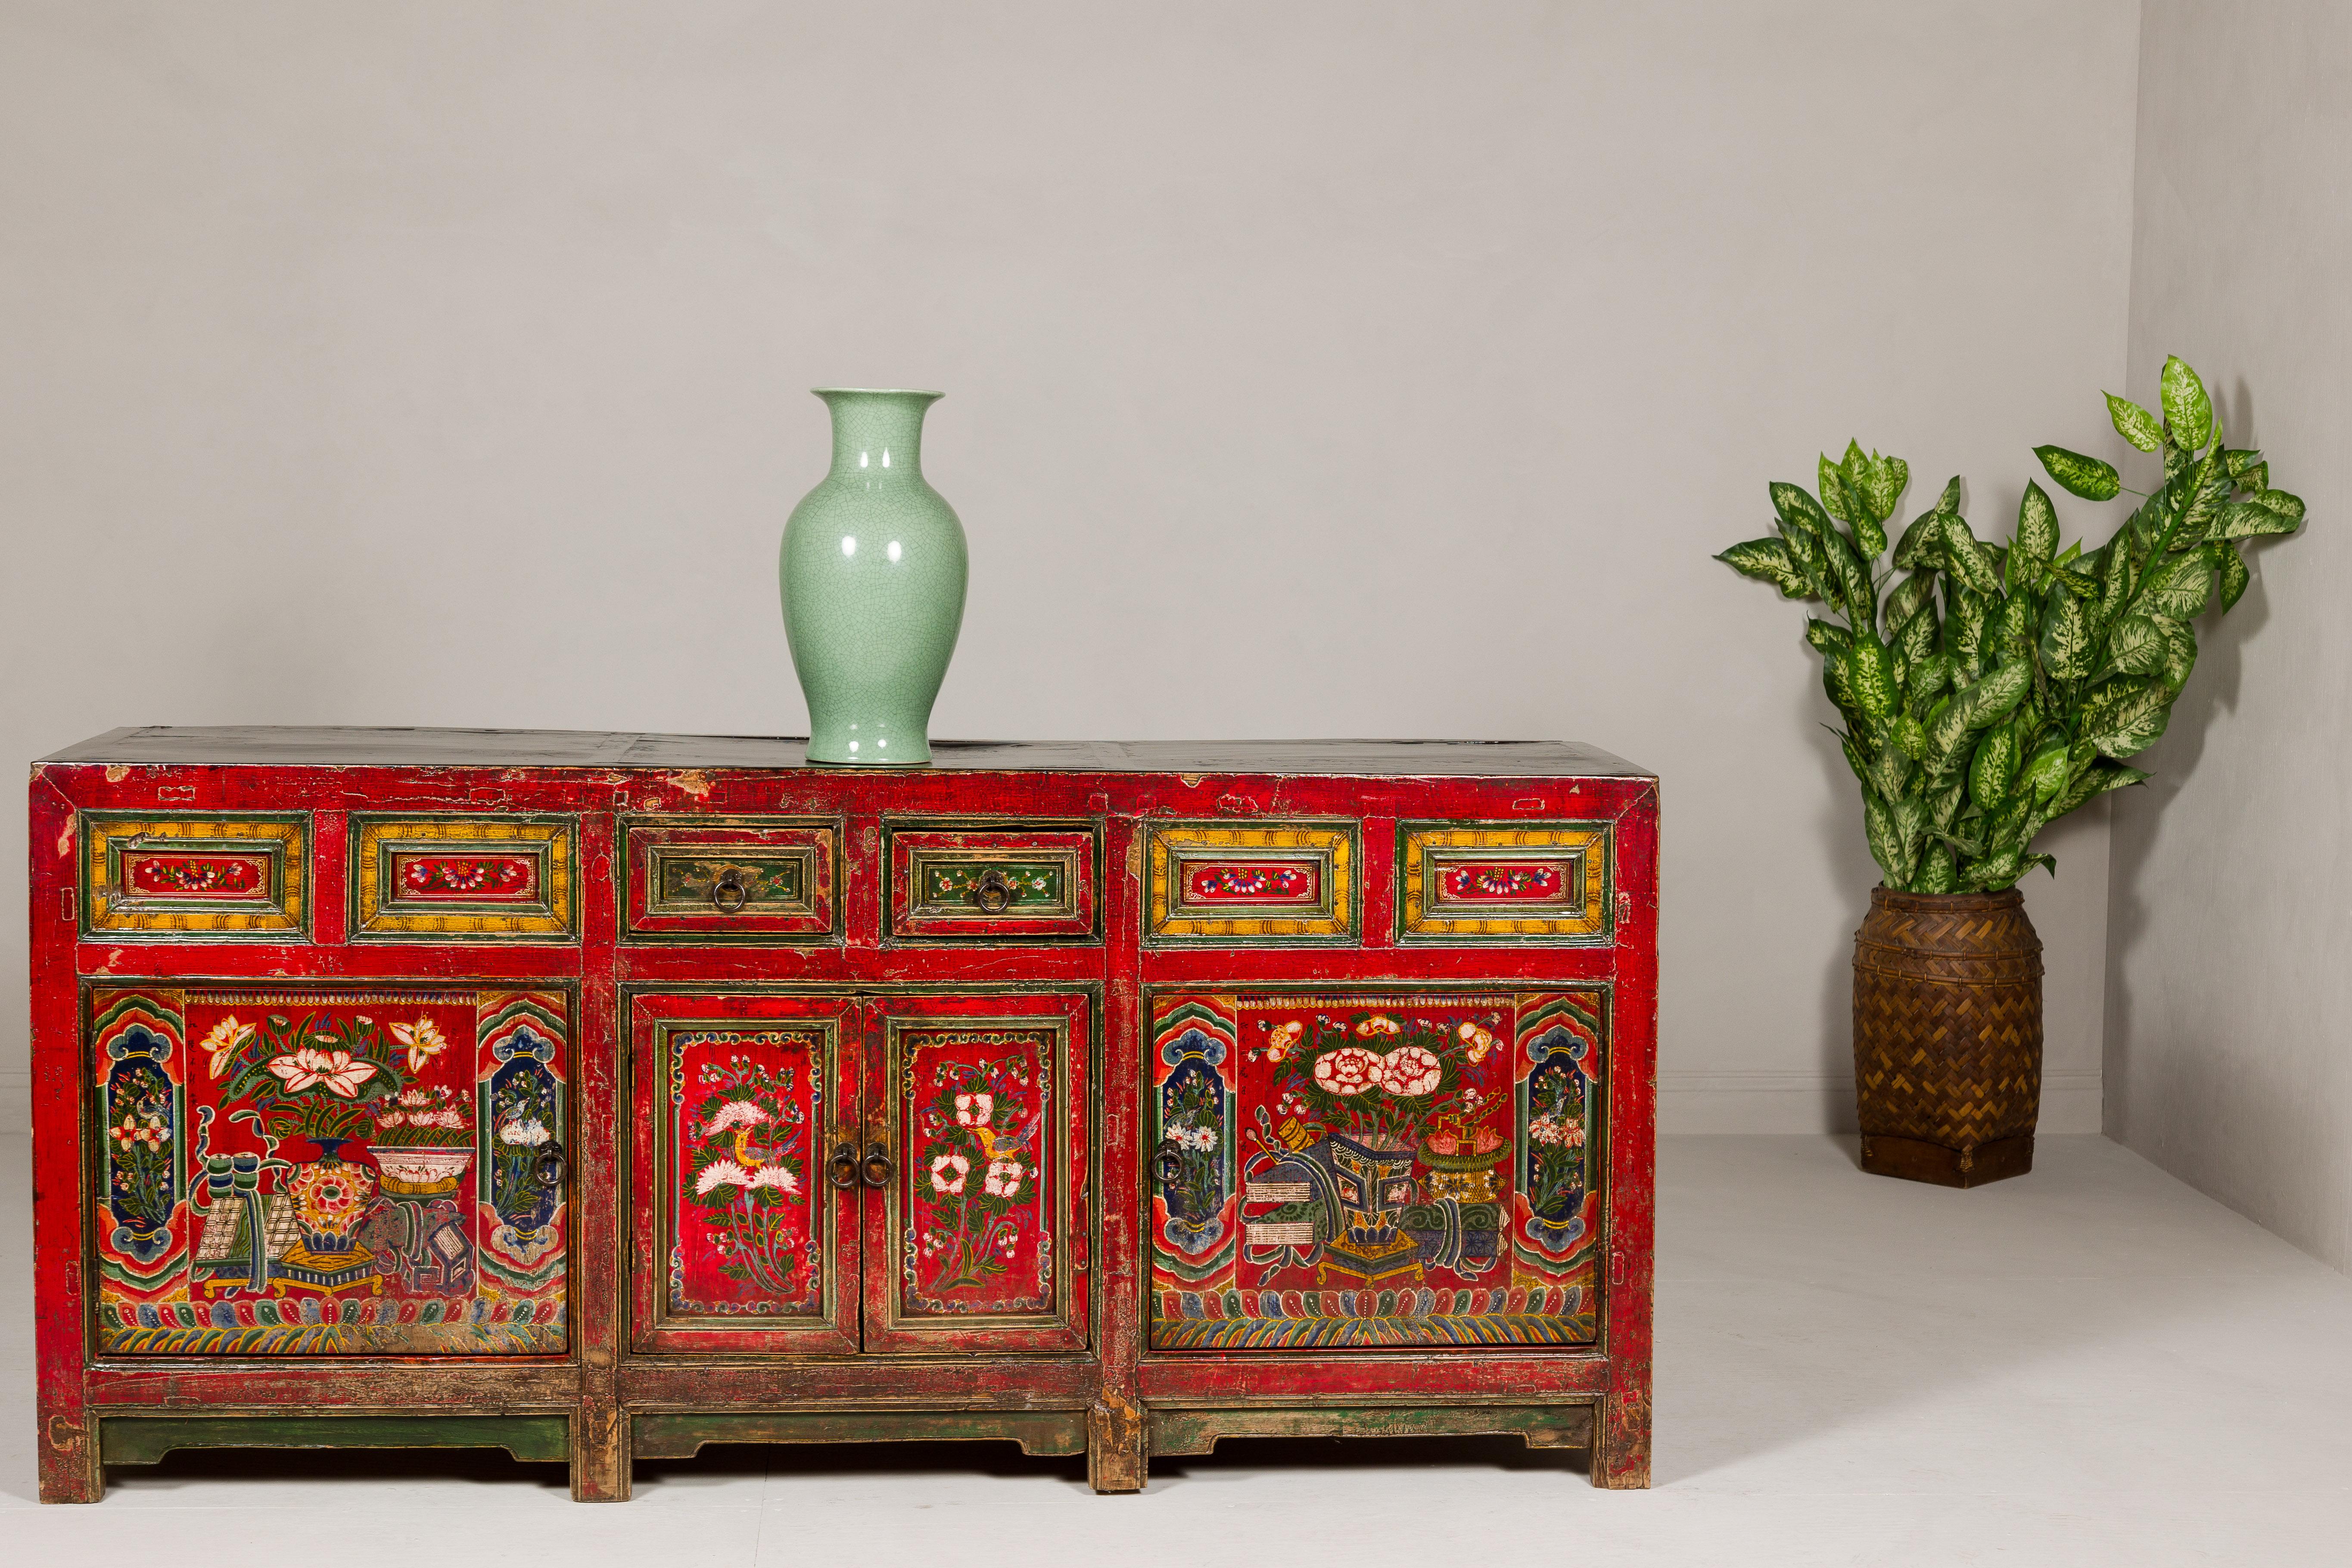 An antique Mongolian long polychrome sideboard with four doors and two drawers. This antique Mongolian long polychrome sideboard is a captivating fusion of form and function, rich in history and vibrant in aesthetic. Its striking red ground serves